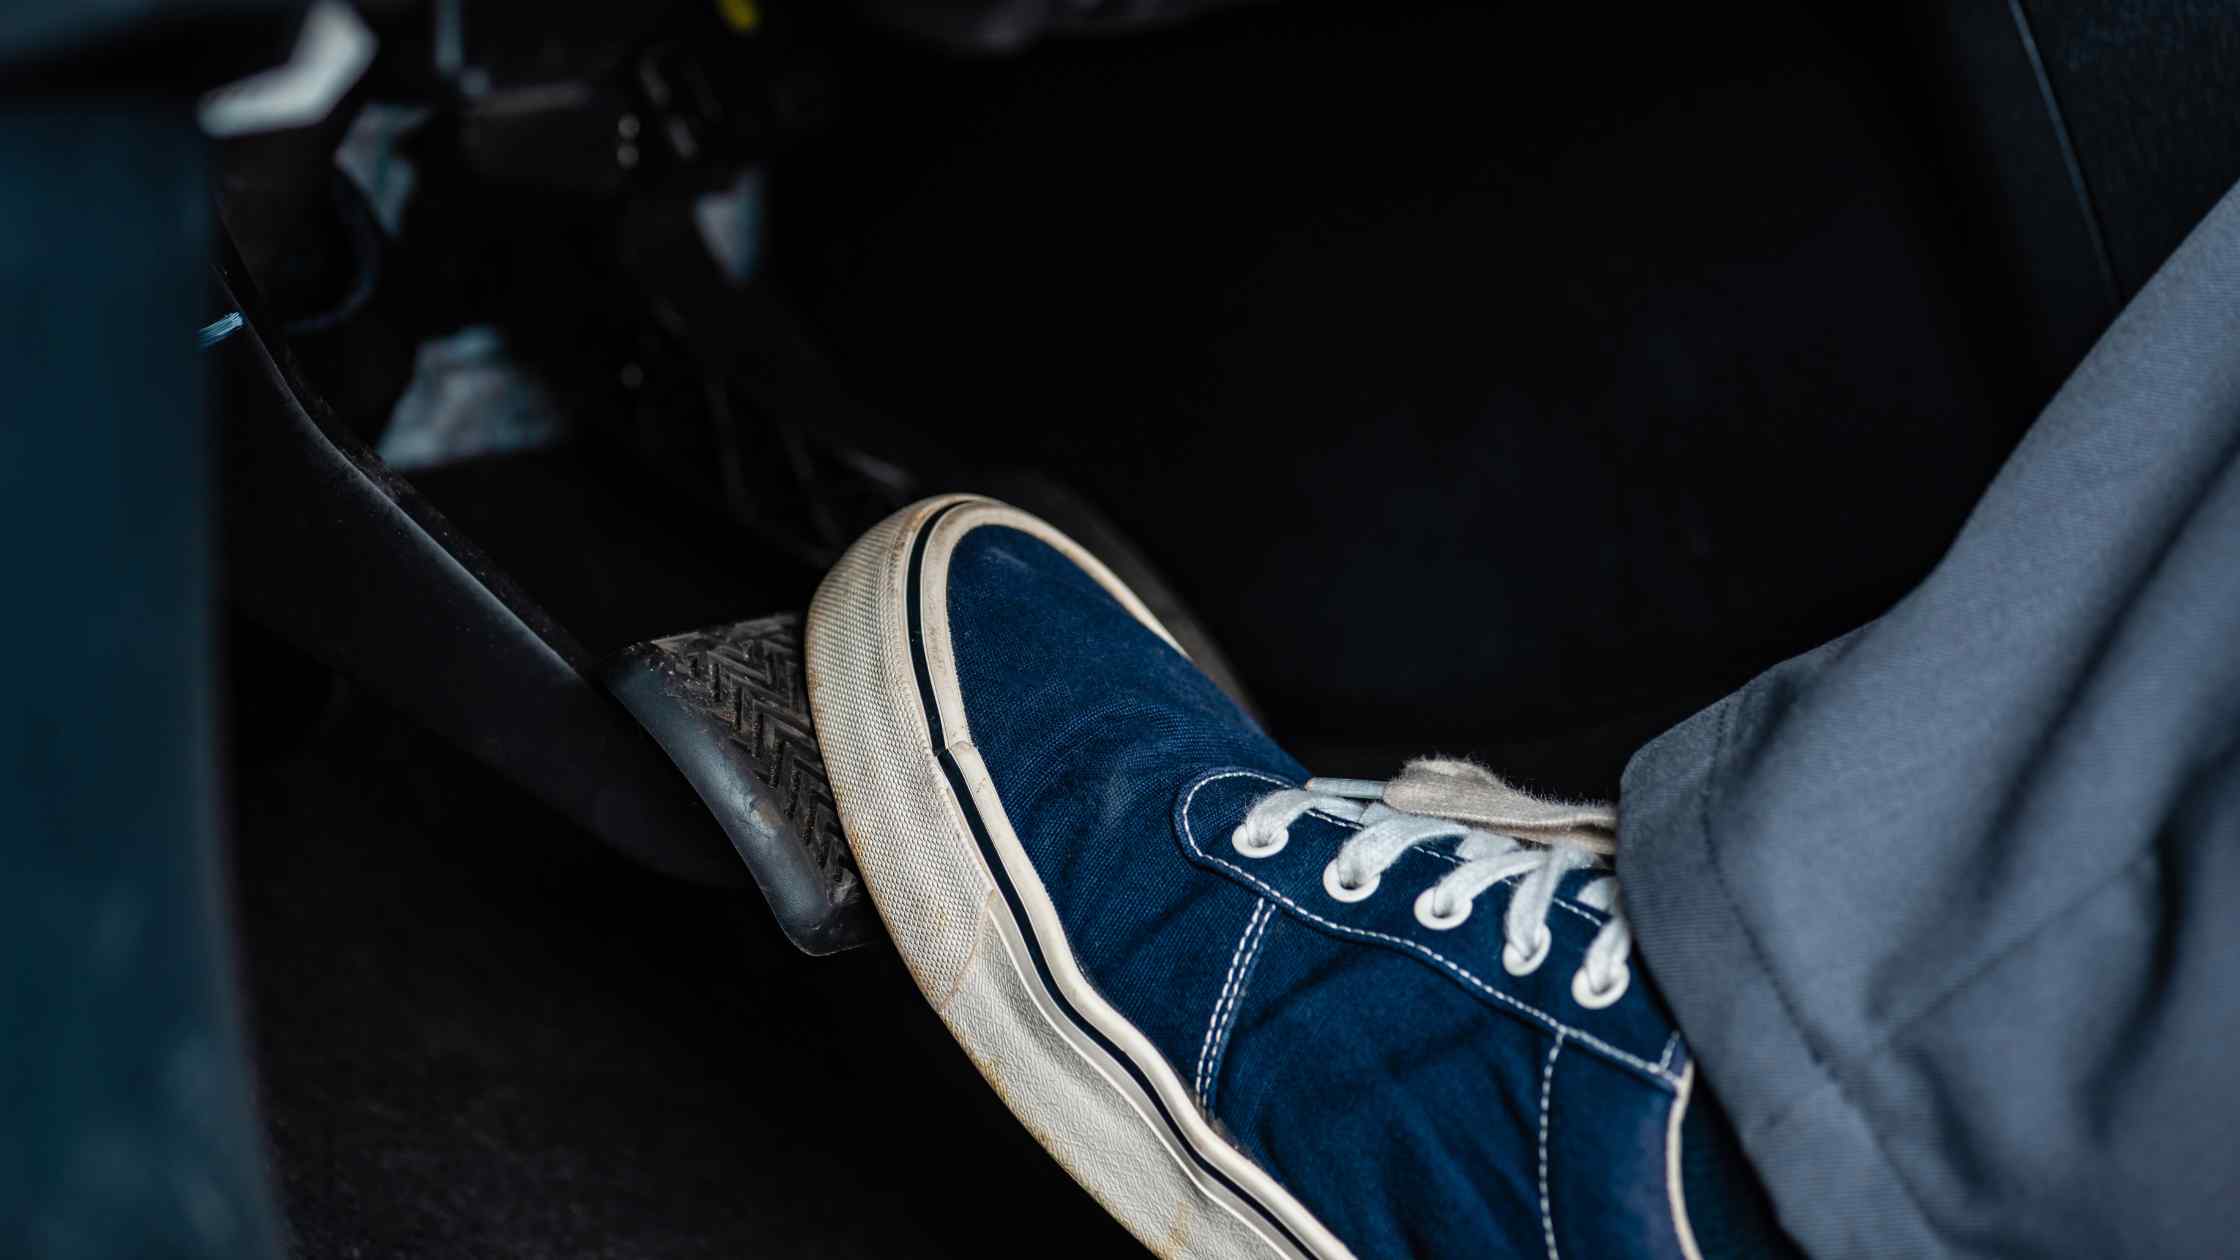 5 Simple Ways To Fix Brake Pedal Vibration When Stopping (Drive Your Car Safely)